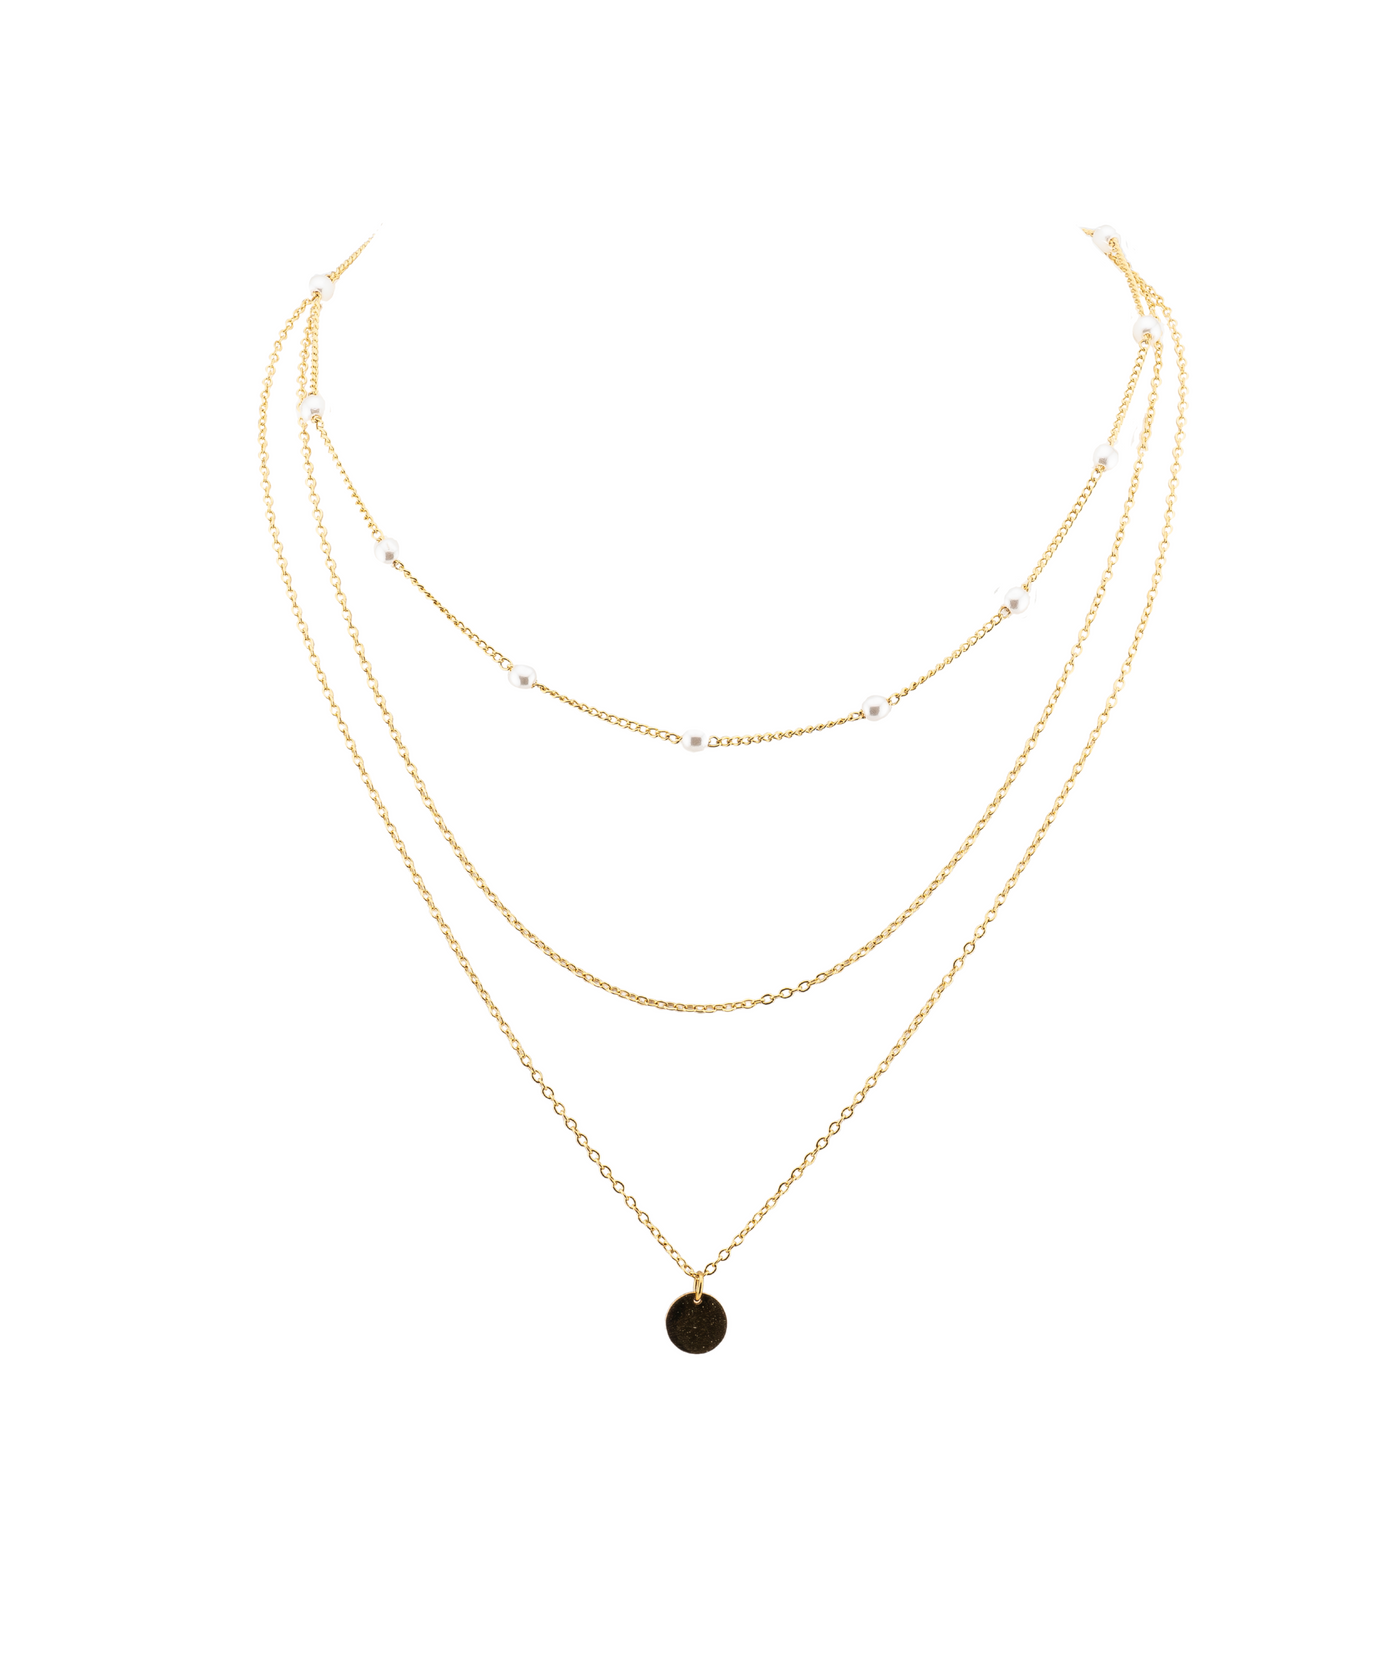 Whimsical Layered Necklace - Shop Hey Girl 